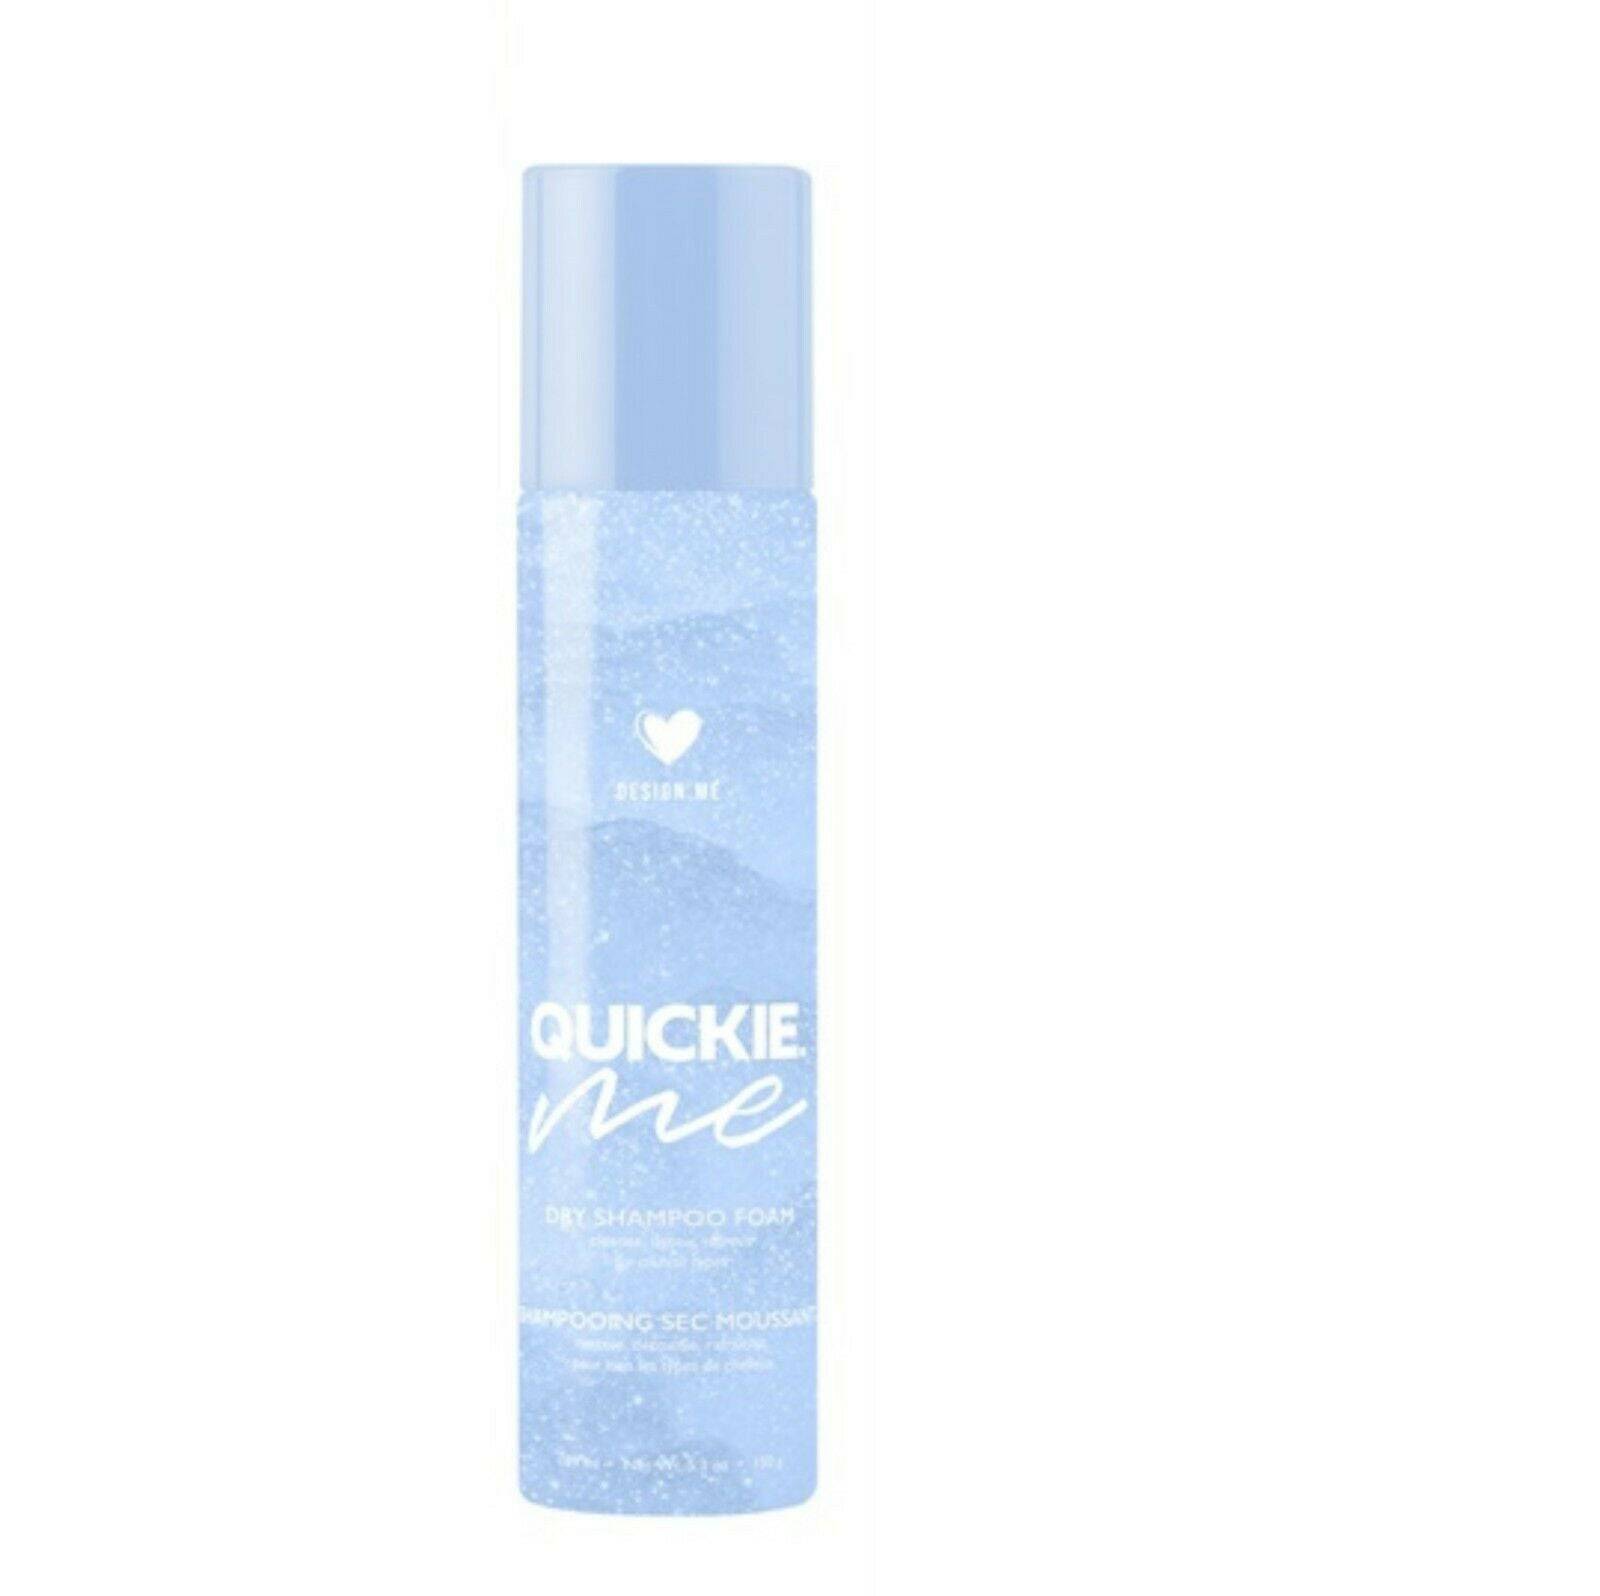 DesignME Quickie Me Dry Shampoo Foam for All Hair Types 189ml x 2  Design Me - On Line Hair Depot